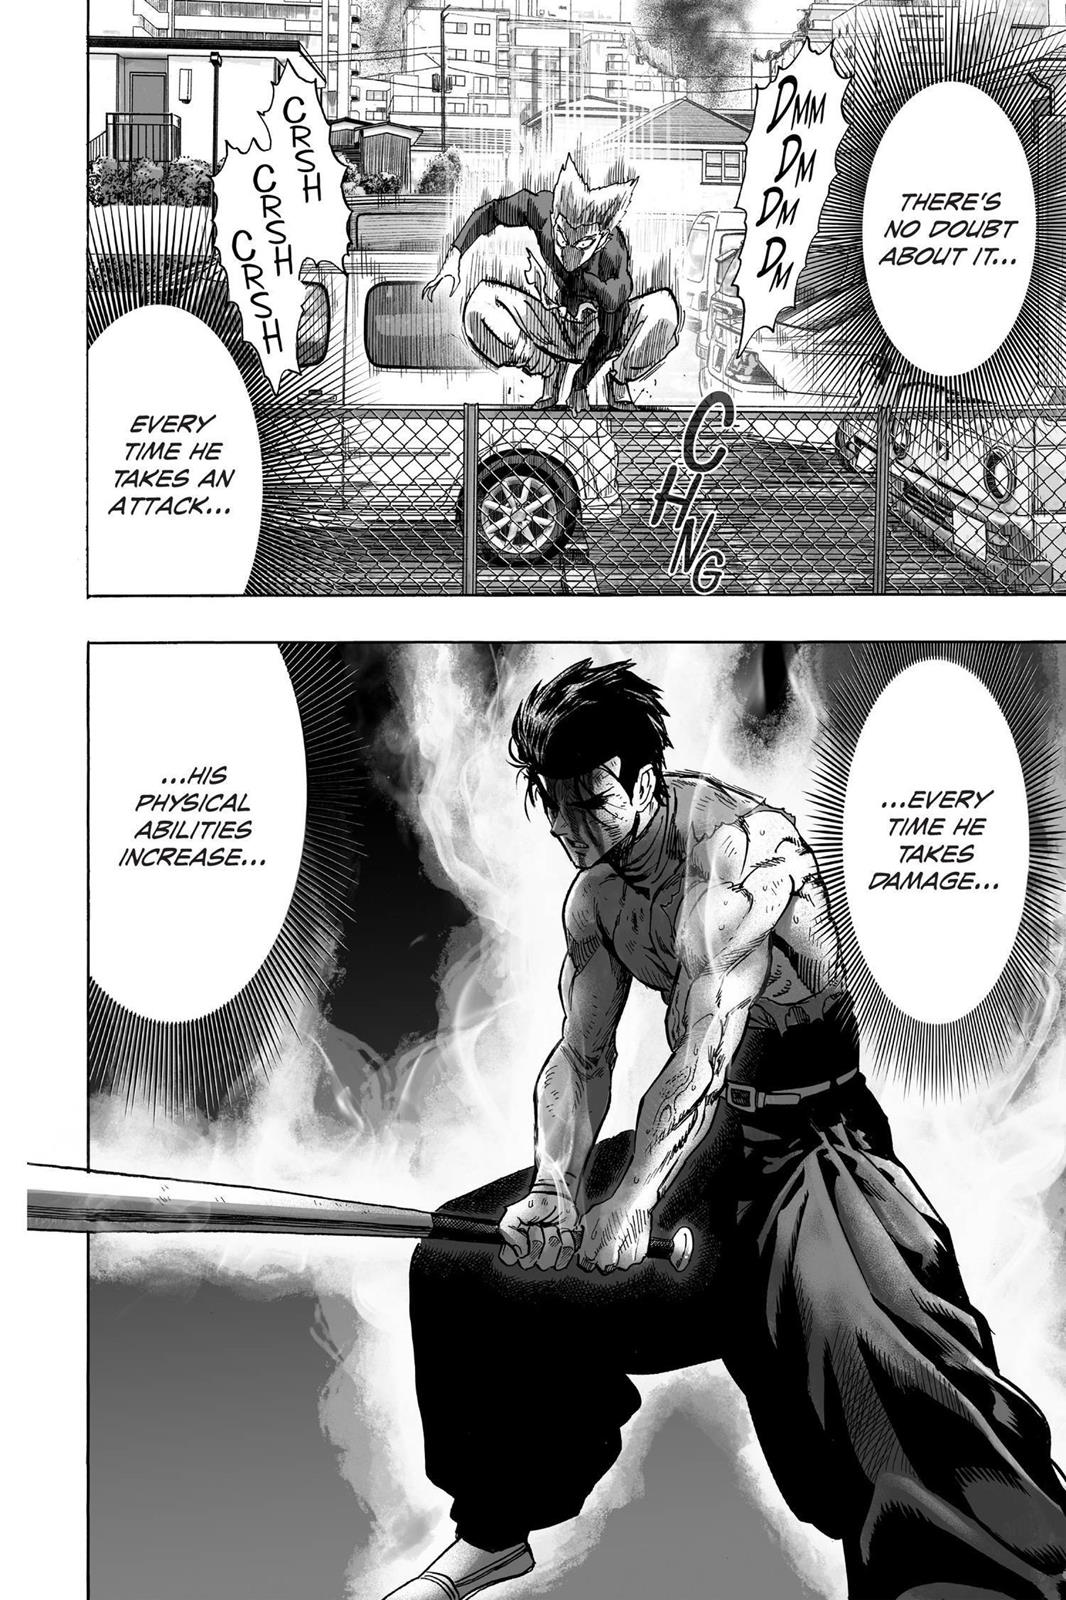 One-Punch Man, Punch 58 image 23